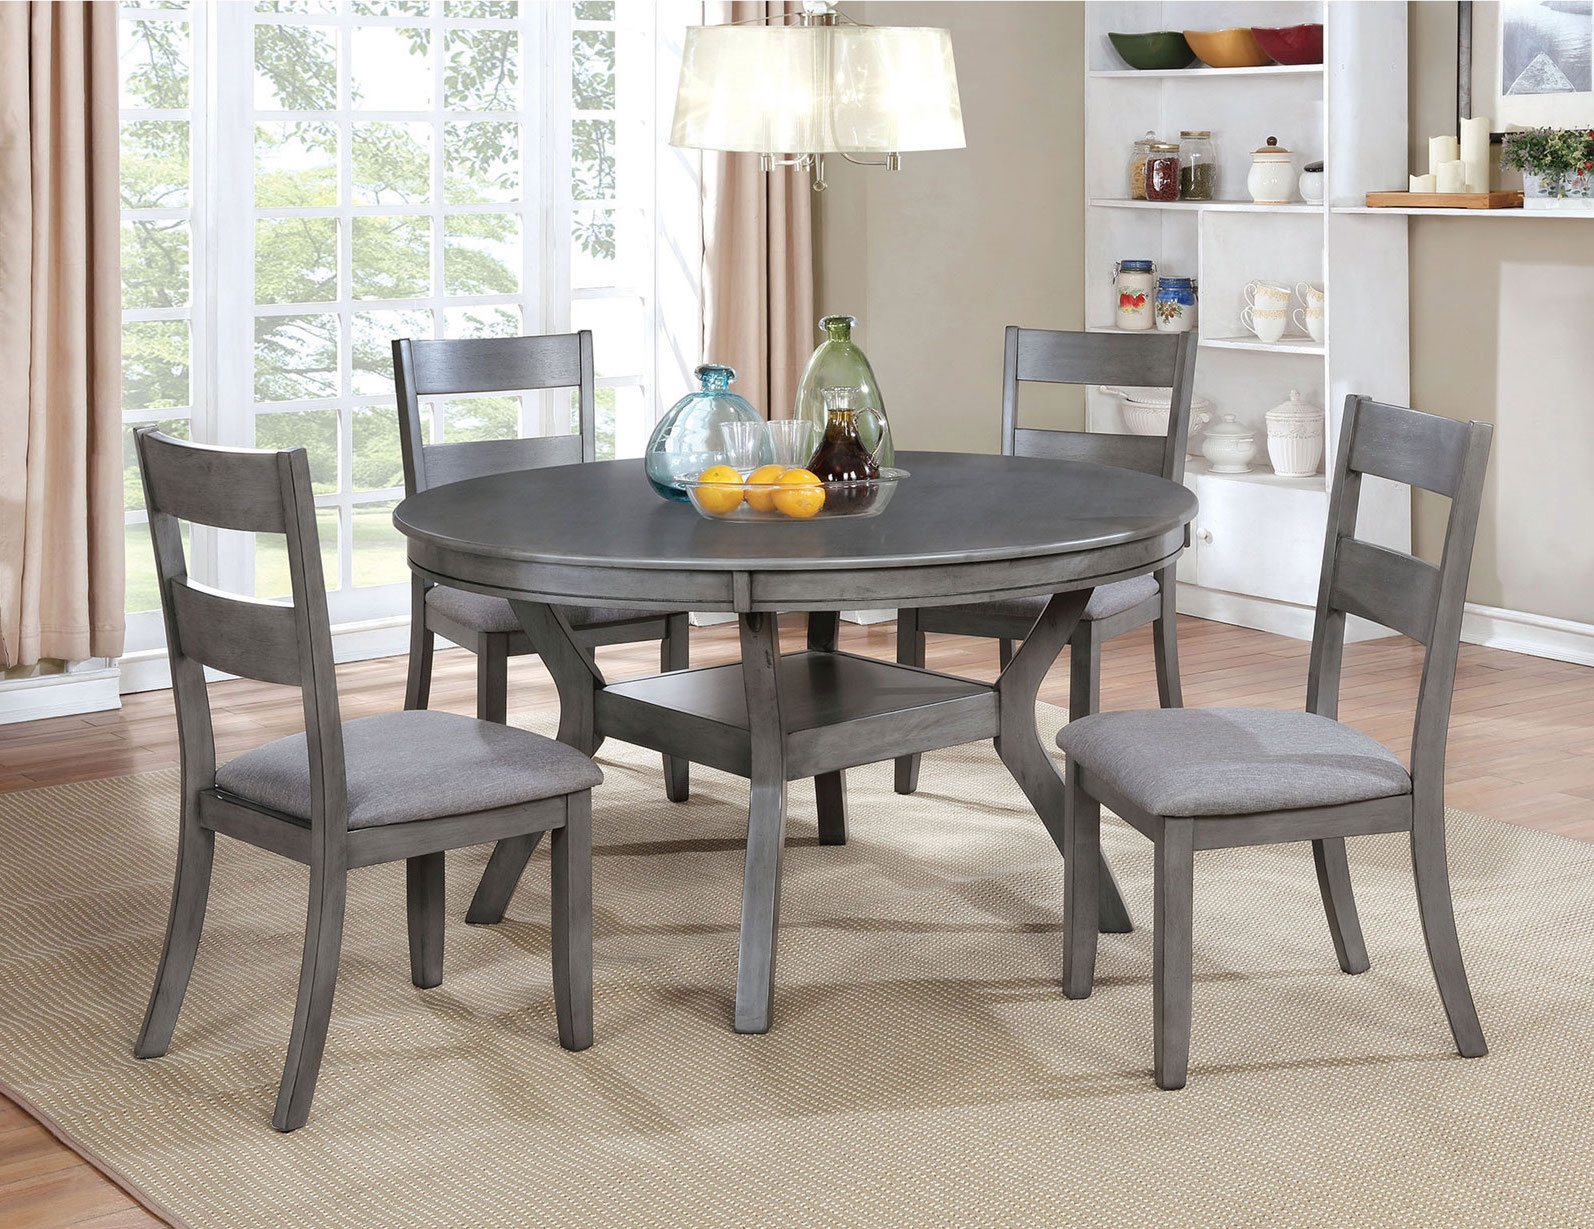 Juniper Transitional Grey 5 Piece Round Dining Set pertaining to proportions 1594 X 1229